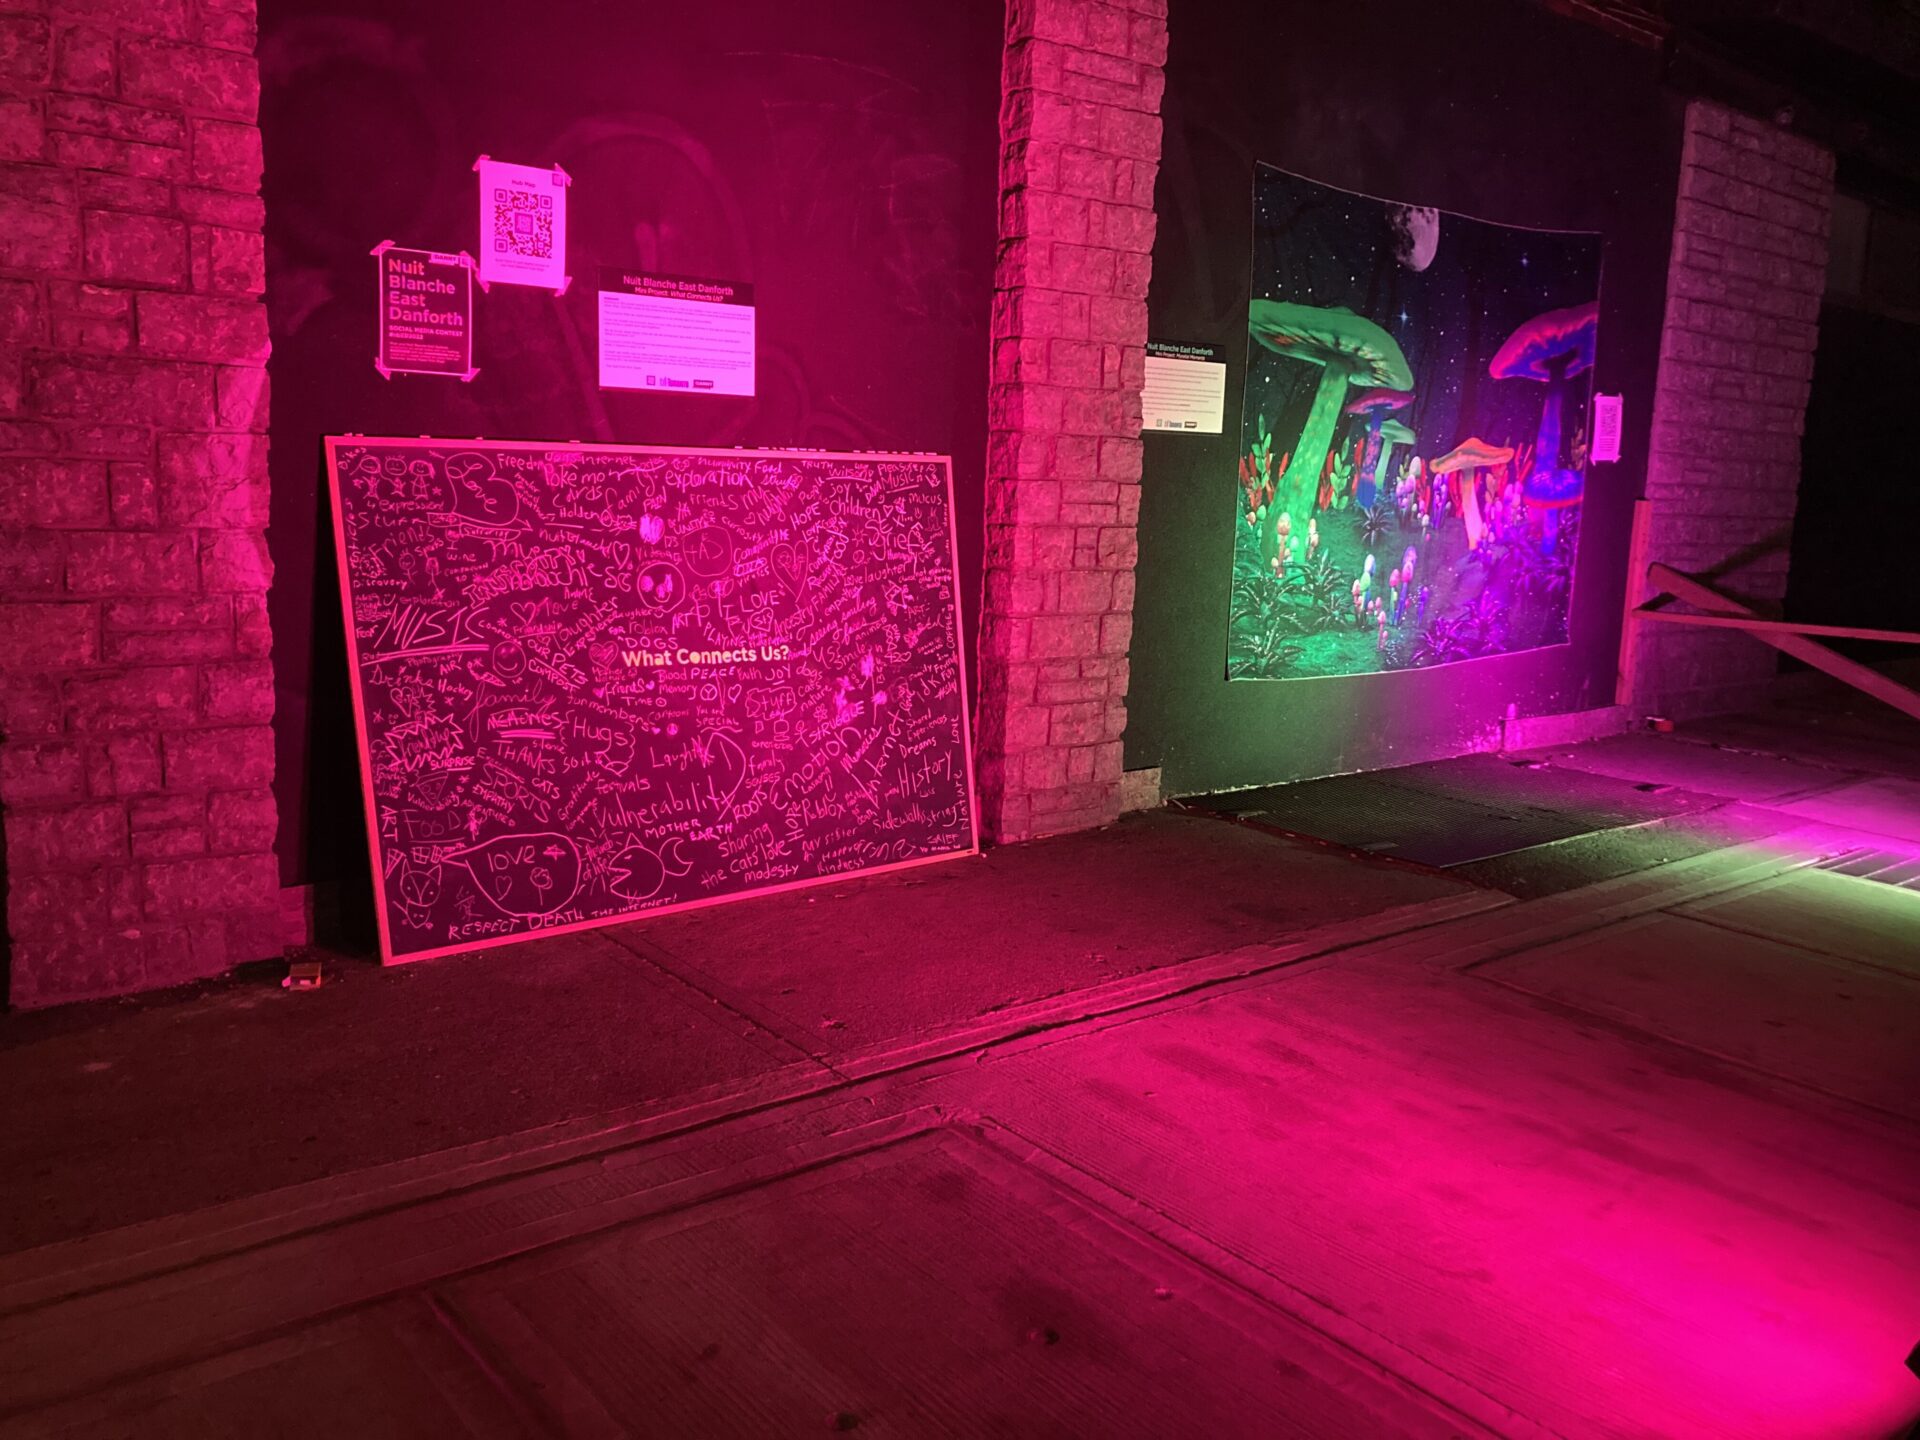 A chalkboard leaning against a wall, lit up in bright hot pink, covered in words and drawings around the theme of "What Connects Us." A display with two mushrooms lit up in green and pink are to the right of the chalkboard.